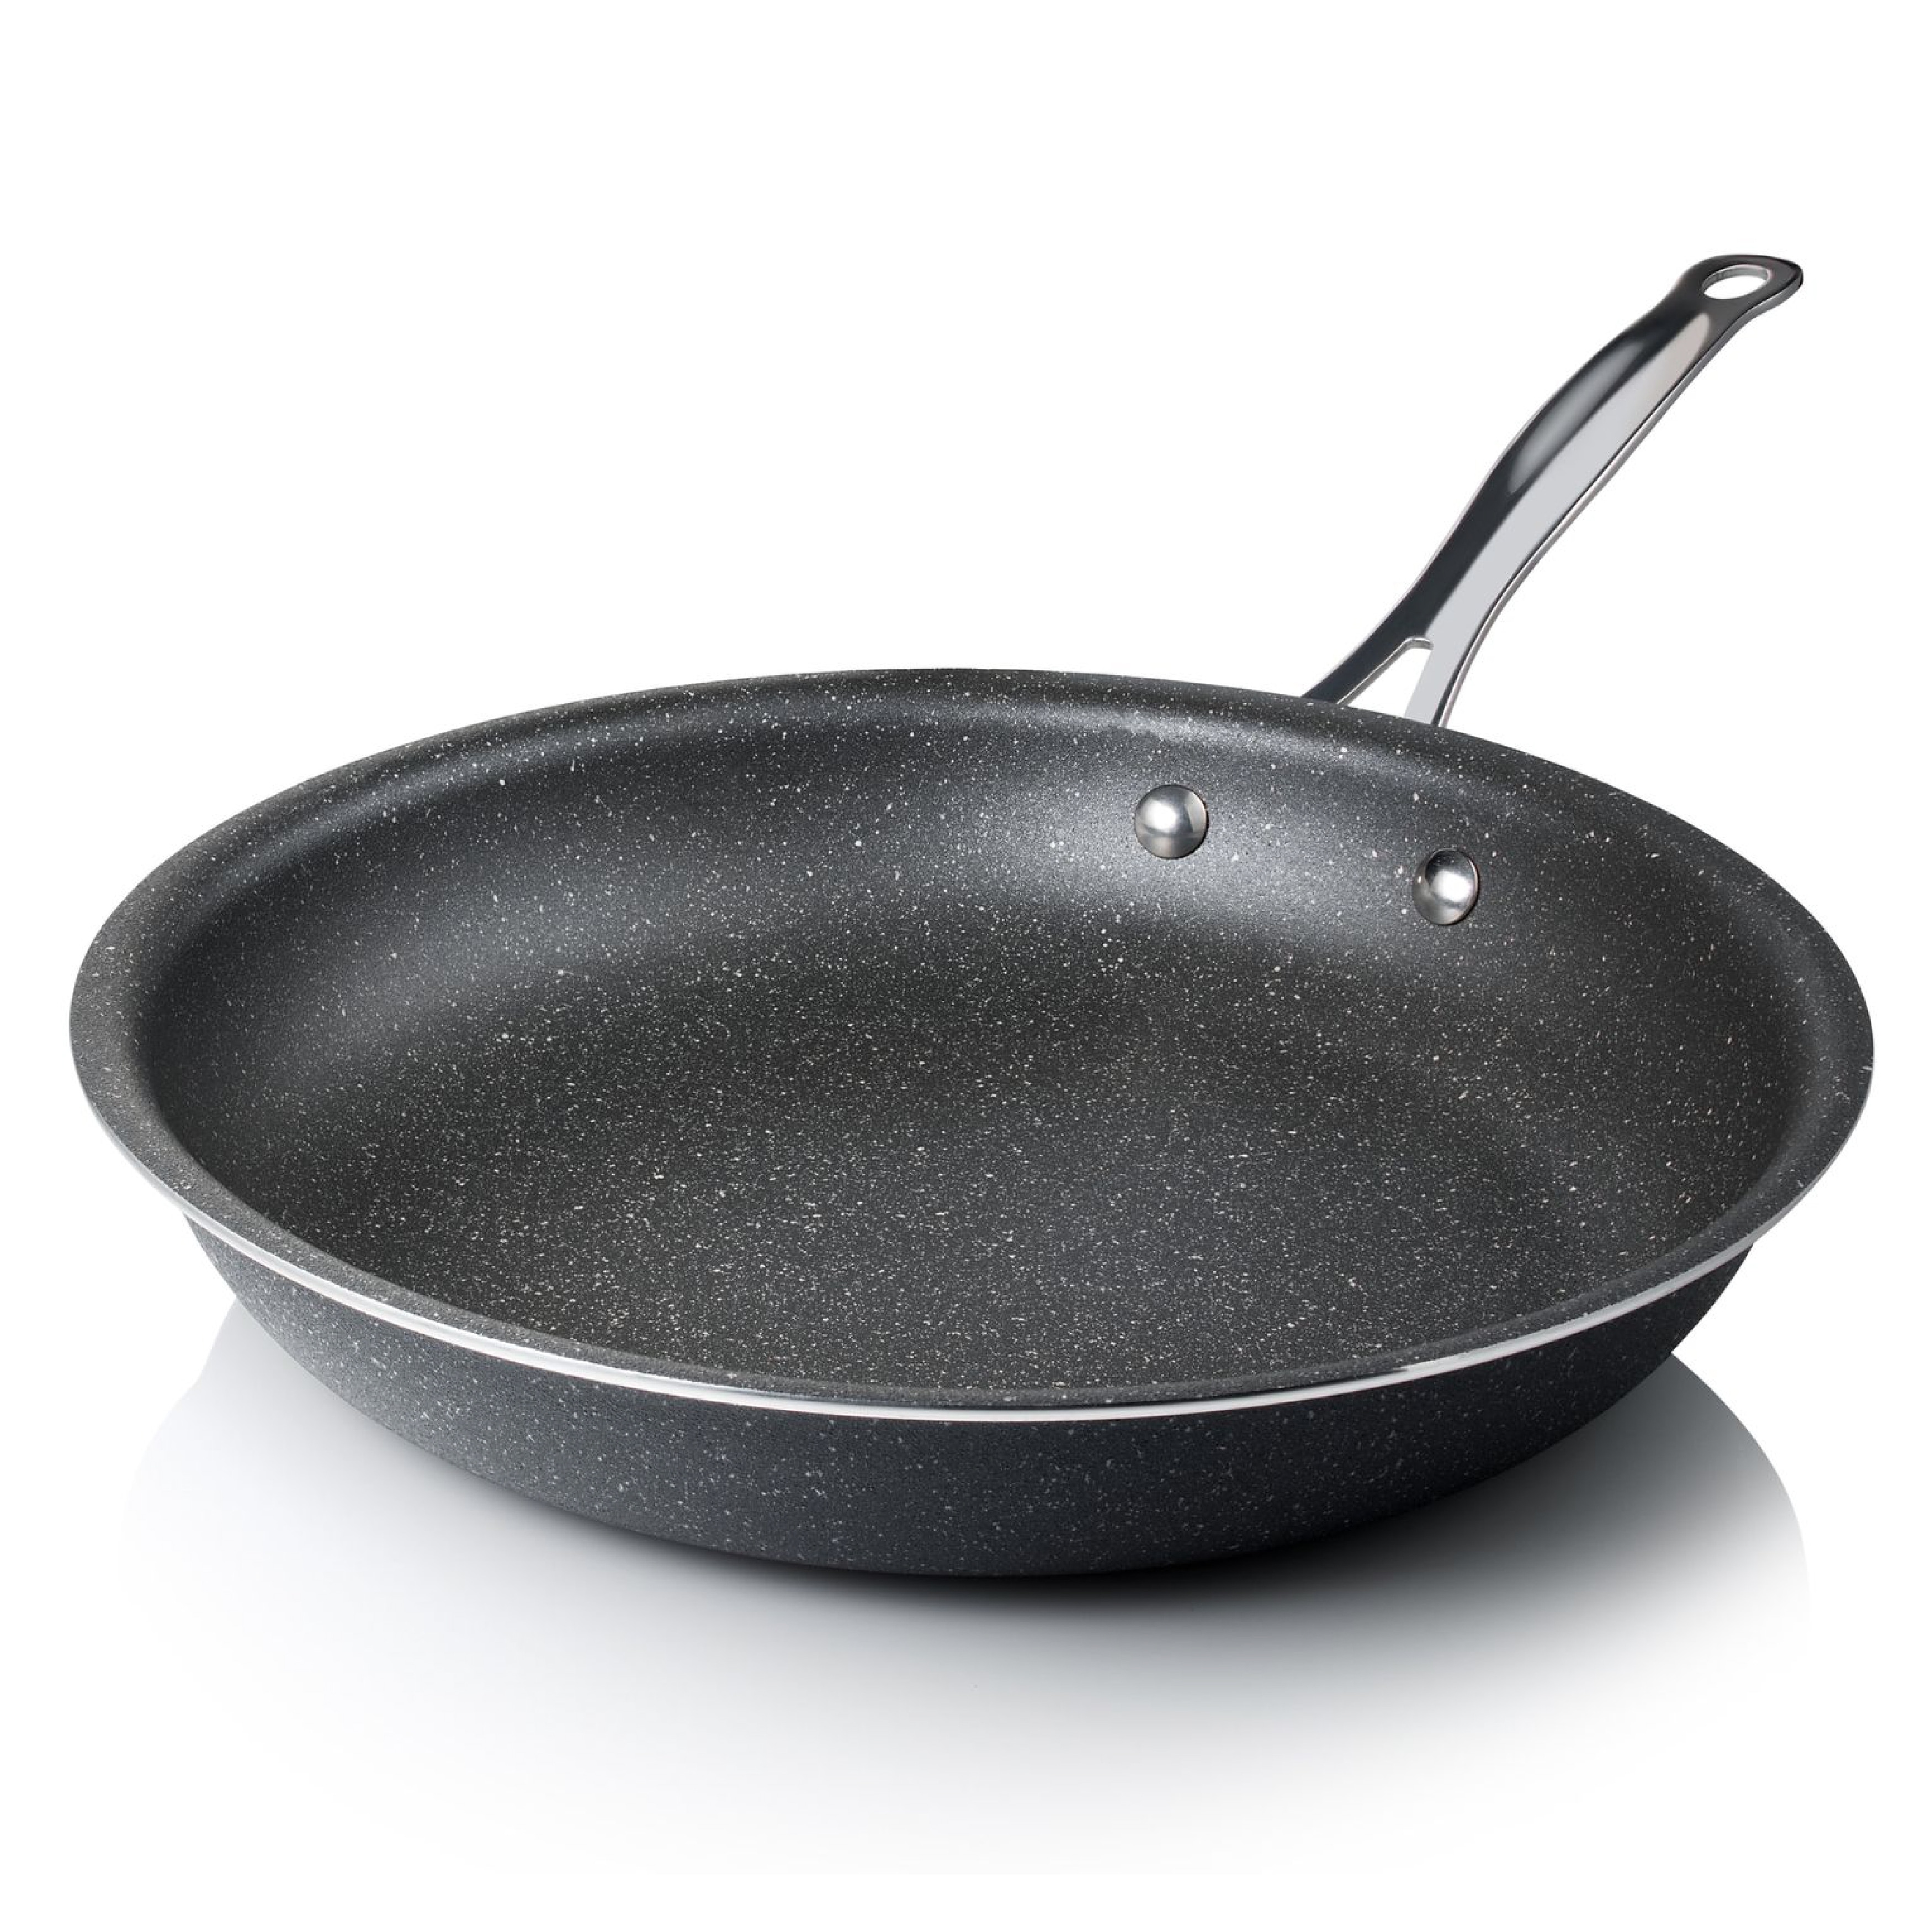 https://ak1.ostkcdn.com/images/products/is/images/direct/cfb49c92408ff588ea53cb018fd36b380d908c25/Granitestone-12%27%27-Nonstick-Fry-Pan-with-Stay-Cool-Handle.jpg